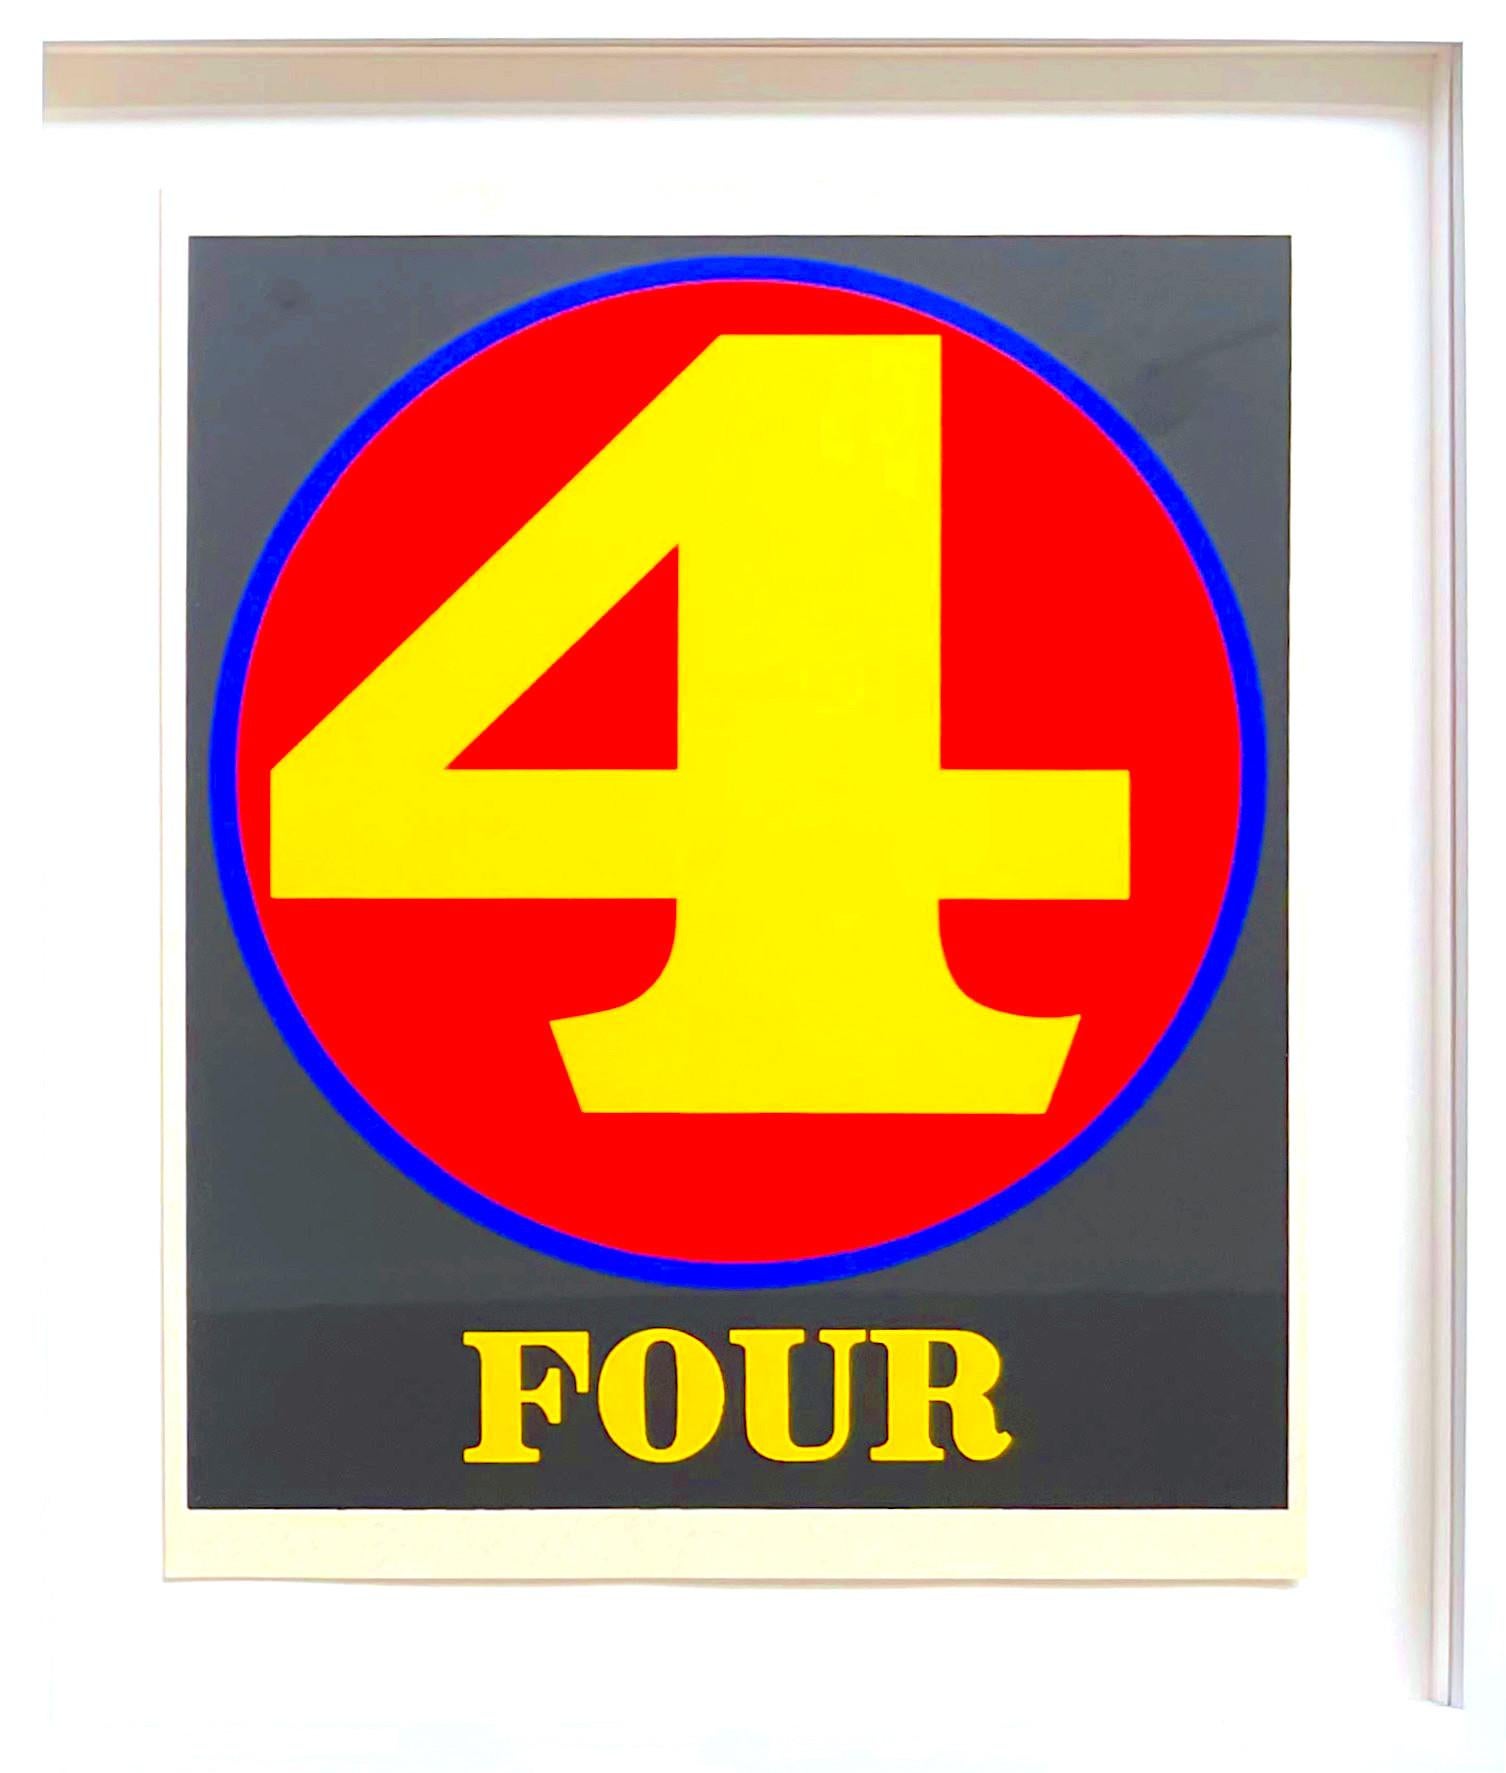 Robert Indiana Abstract Print - 4 (Four), from the original Numbers portfolio (Sheehan 46-55) = Framed